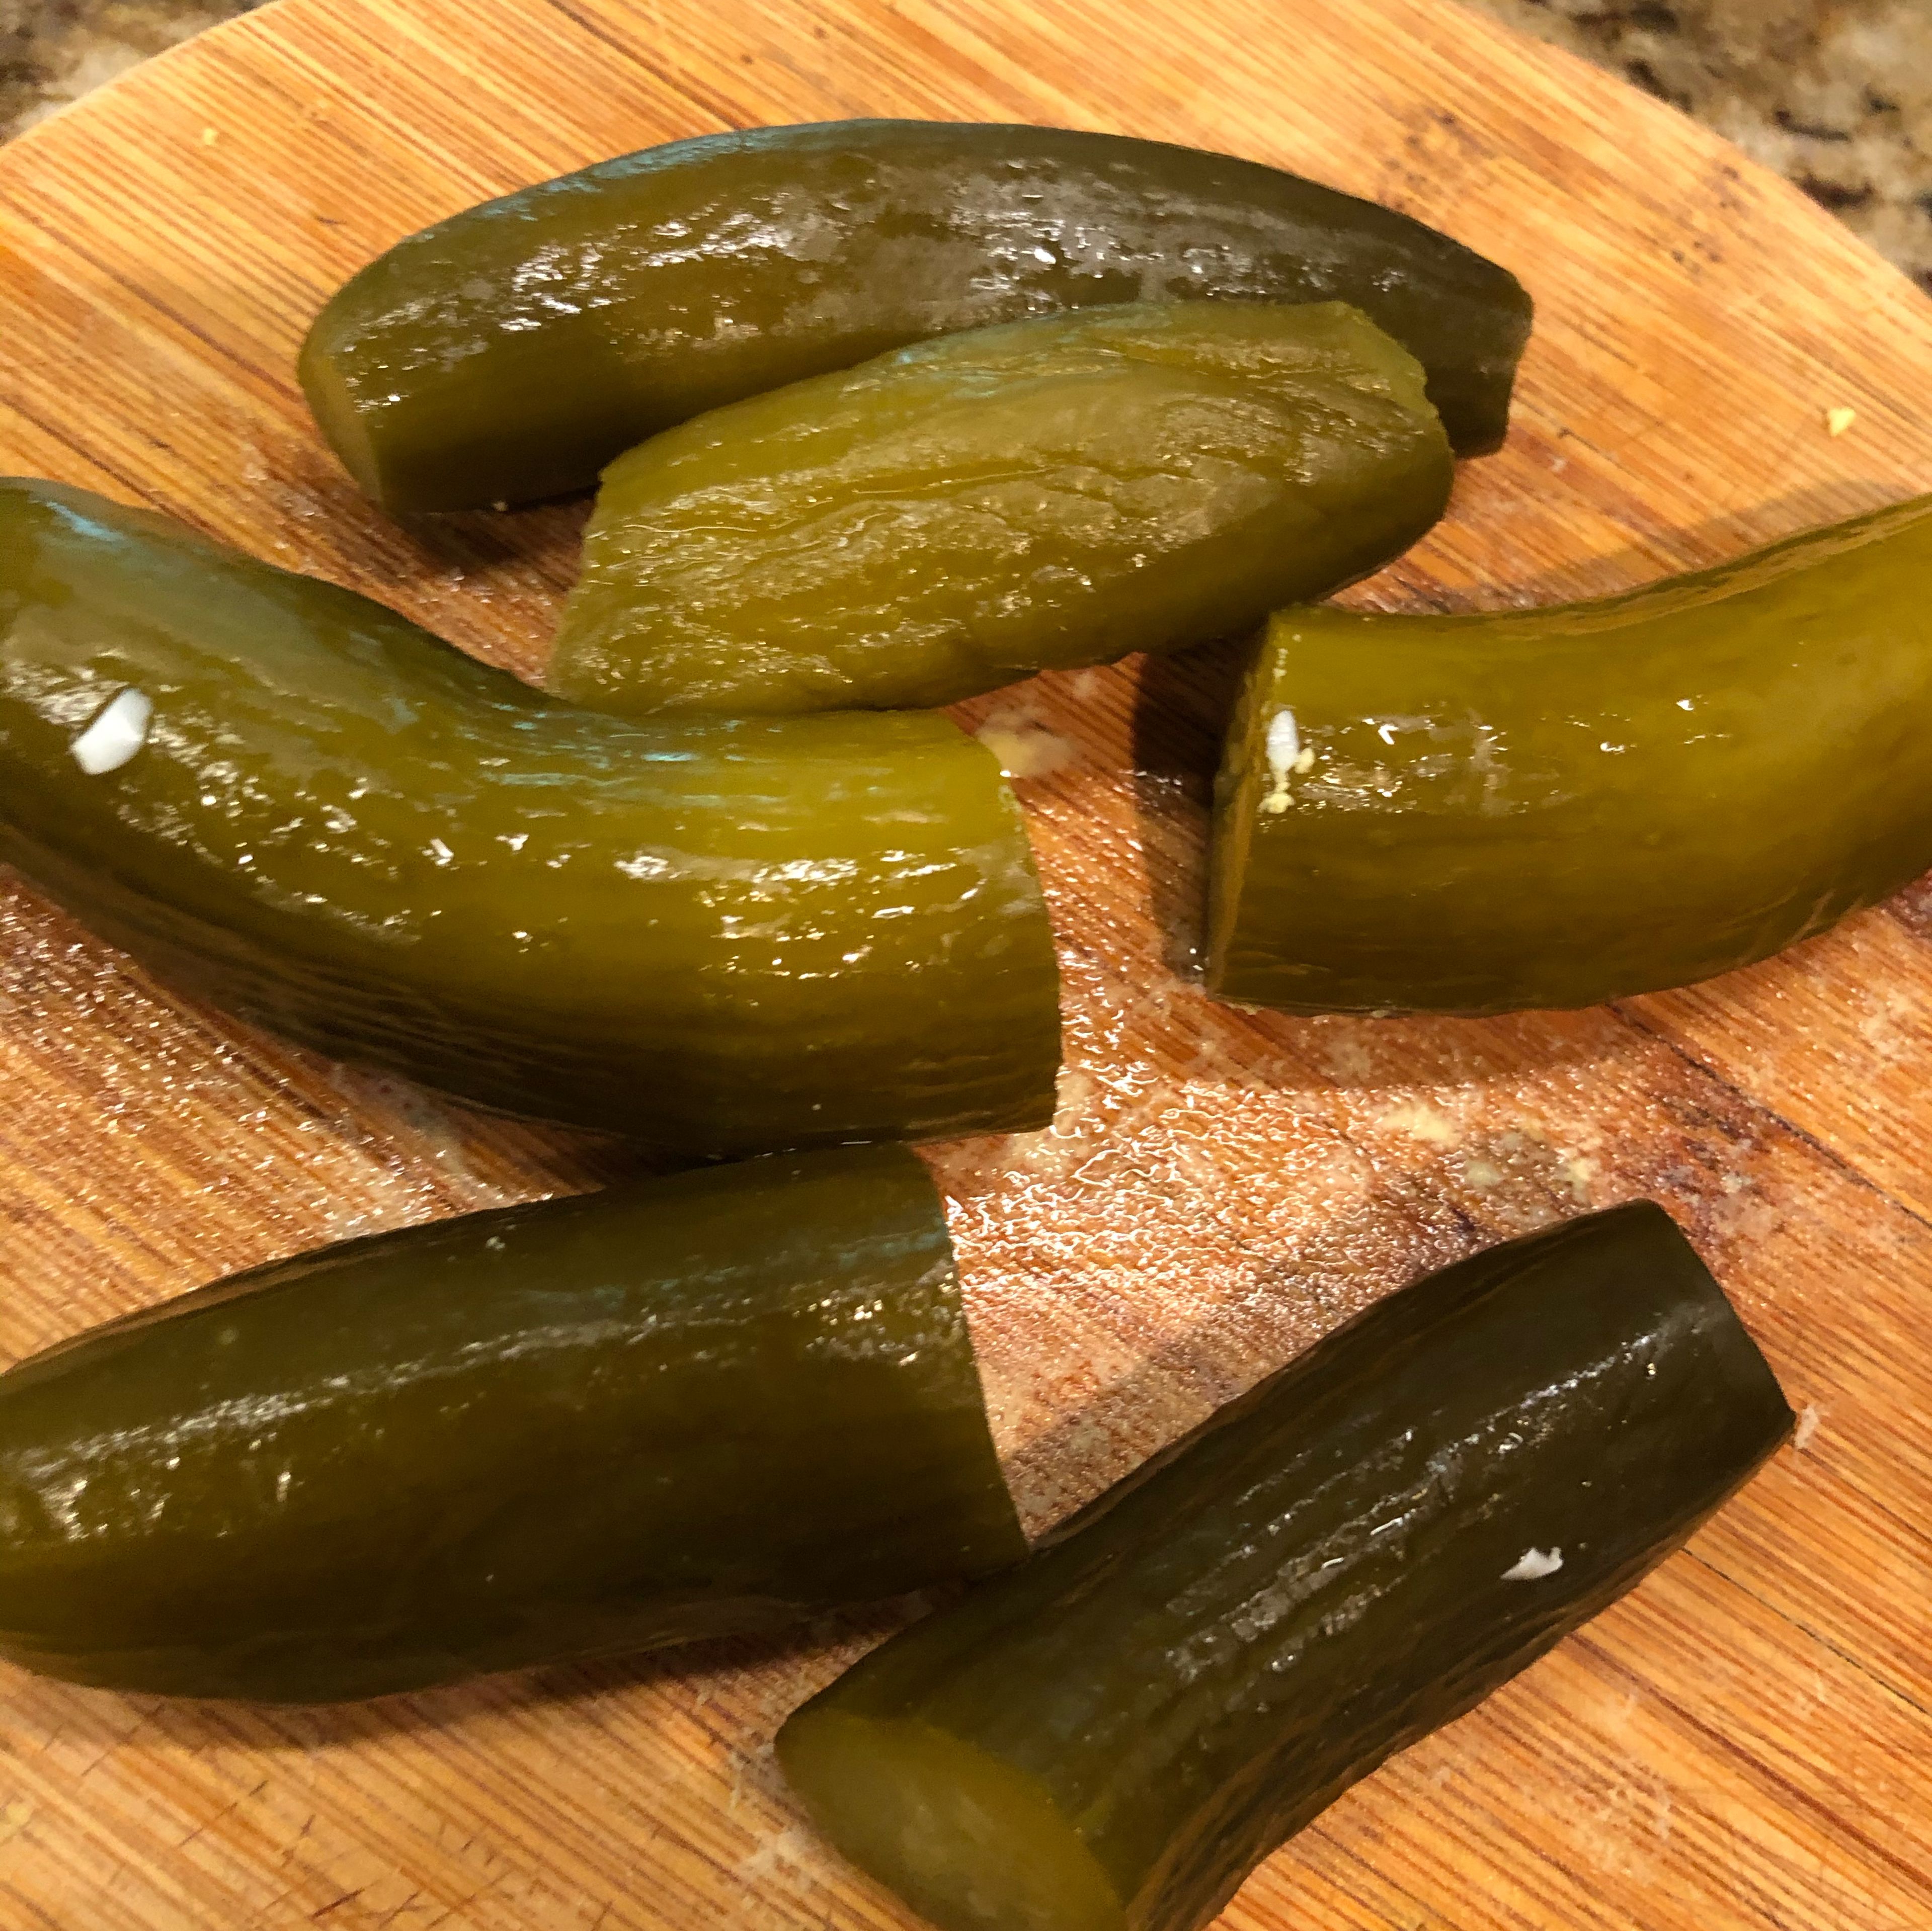 Wash pickles and cut off the butt on each side